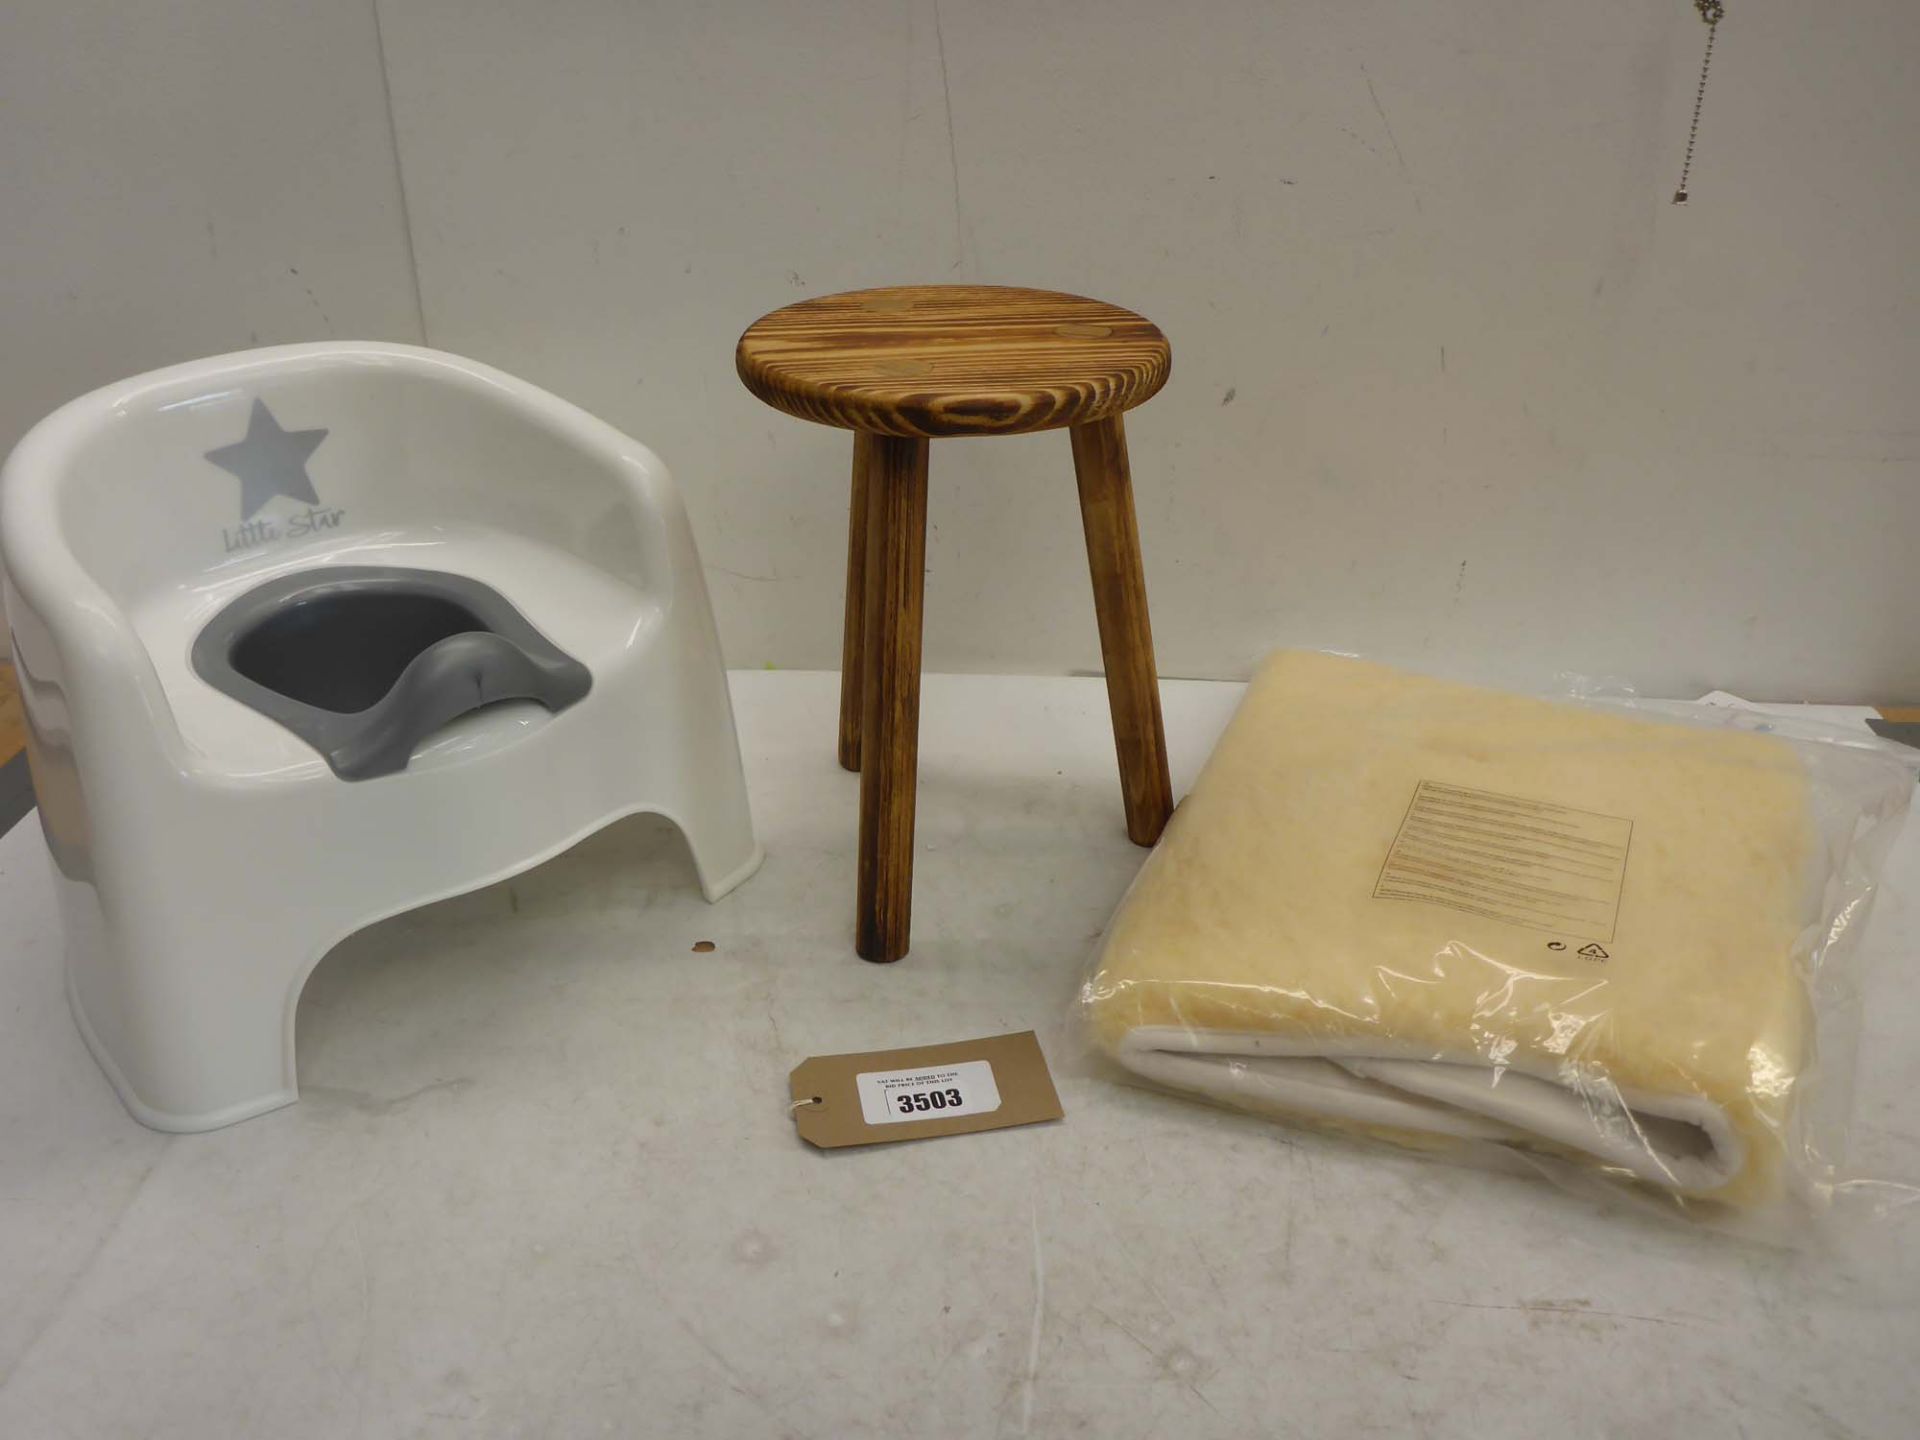 Egg fur seat liner, small stool and Little star potty